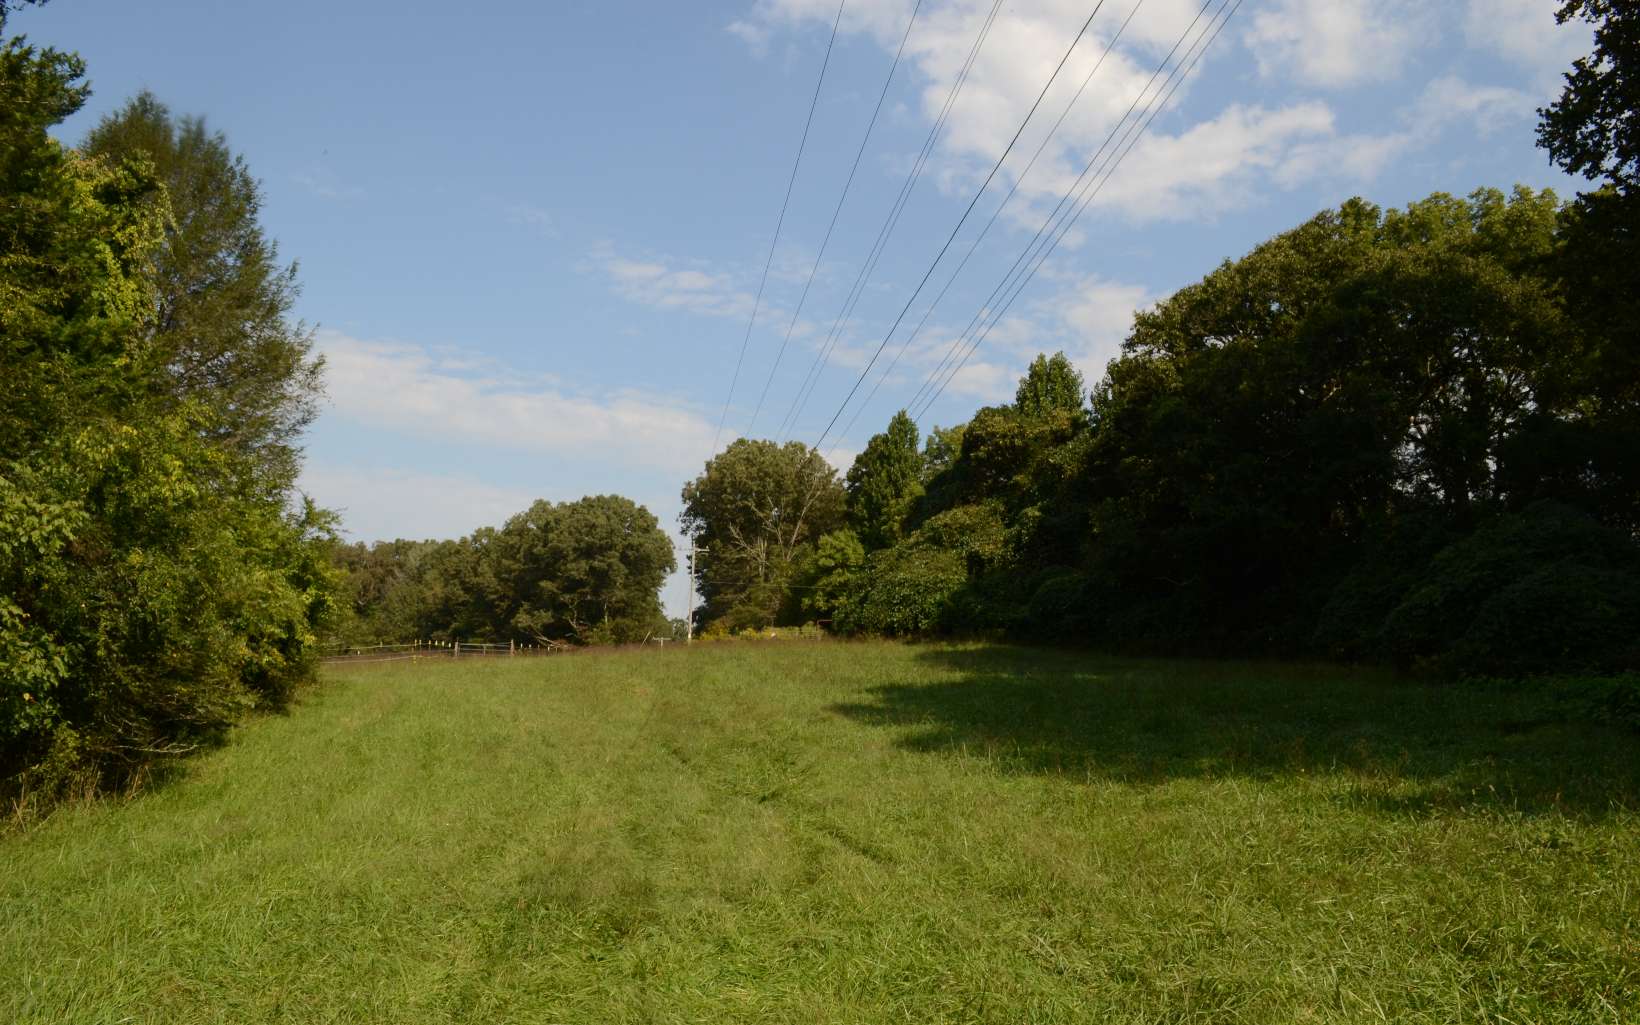 UNRESTRICTED 12.14 acres with a view, stream, pasture & hardwoods-this property has it all. Build your dream home or divide lot for tiny homes. Minutes to the Ocoee River & whitewater rafting, Toccoa River, McCaysville & Blue Ridge GA, & Murphy NC.